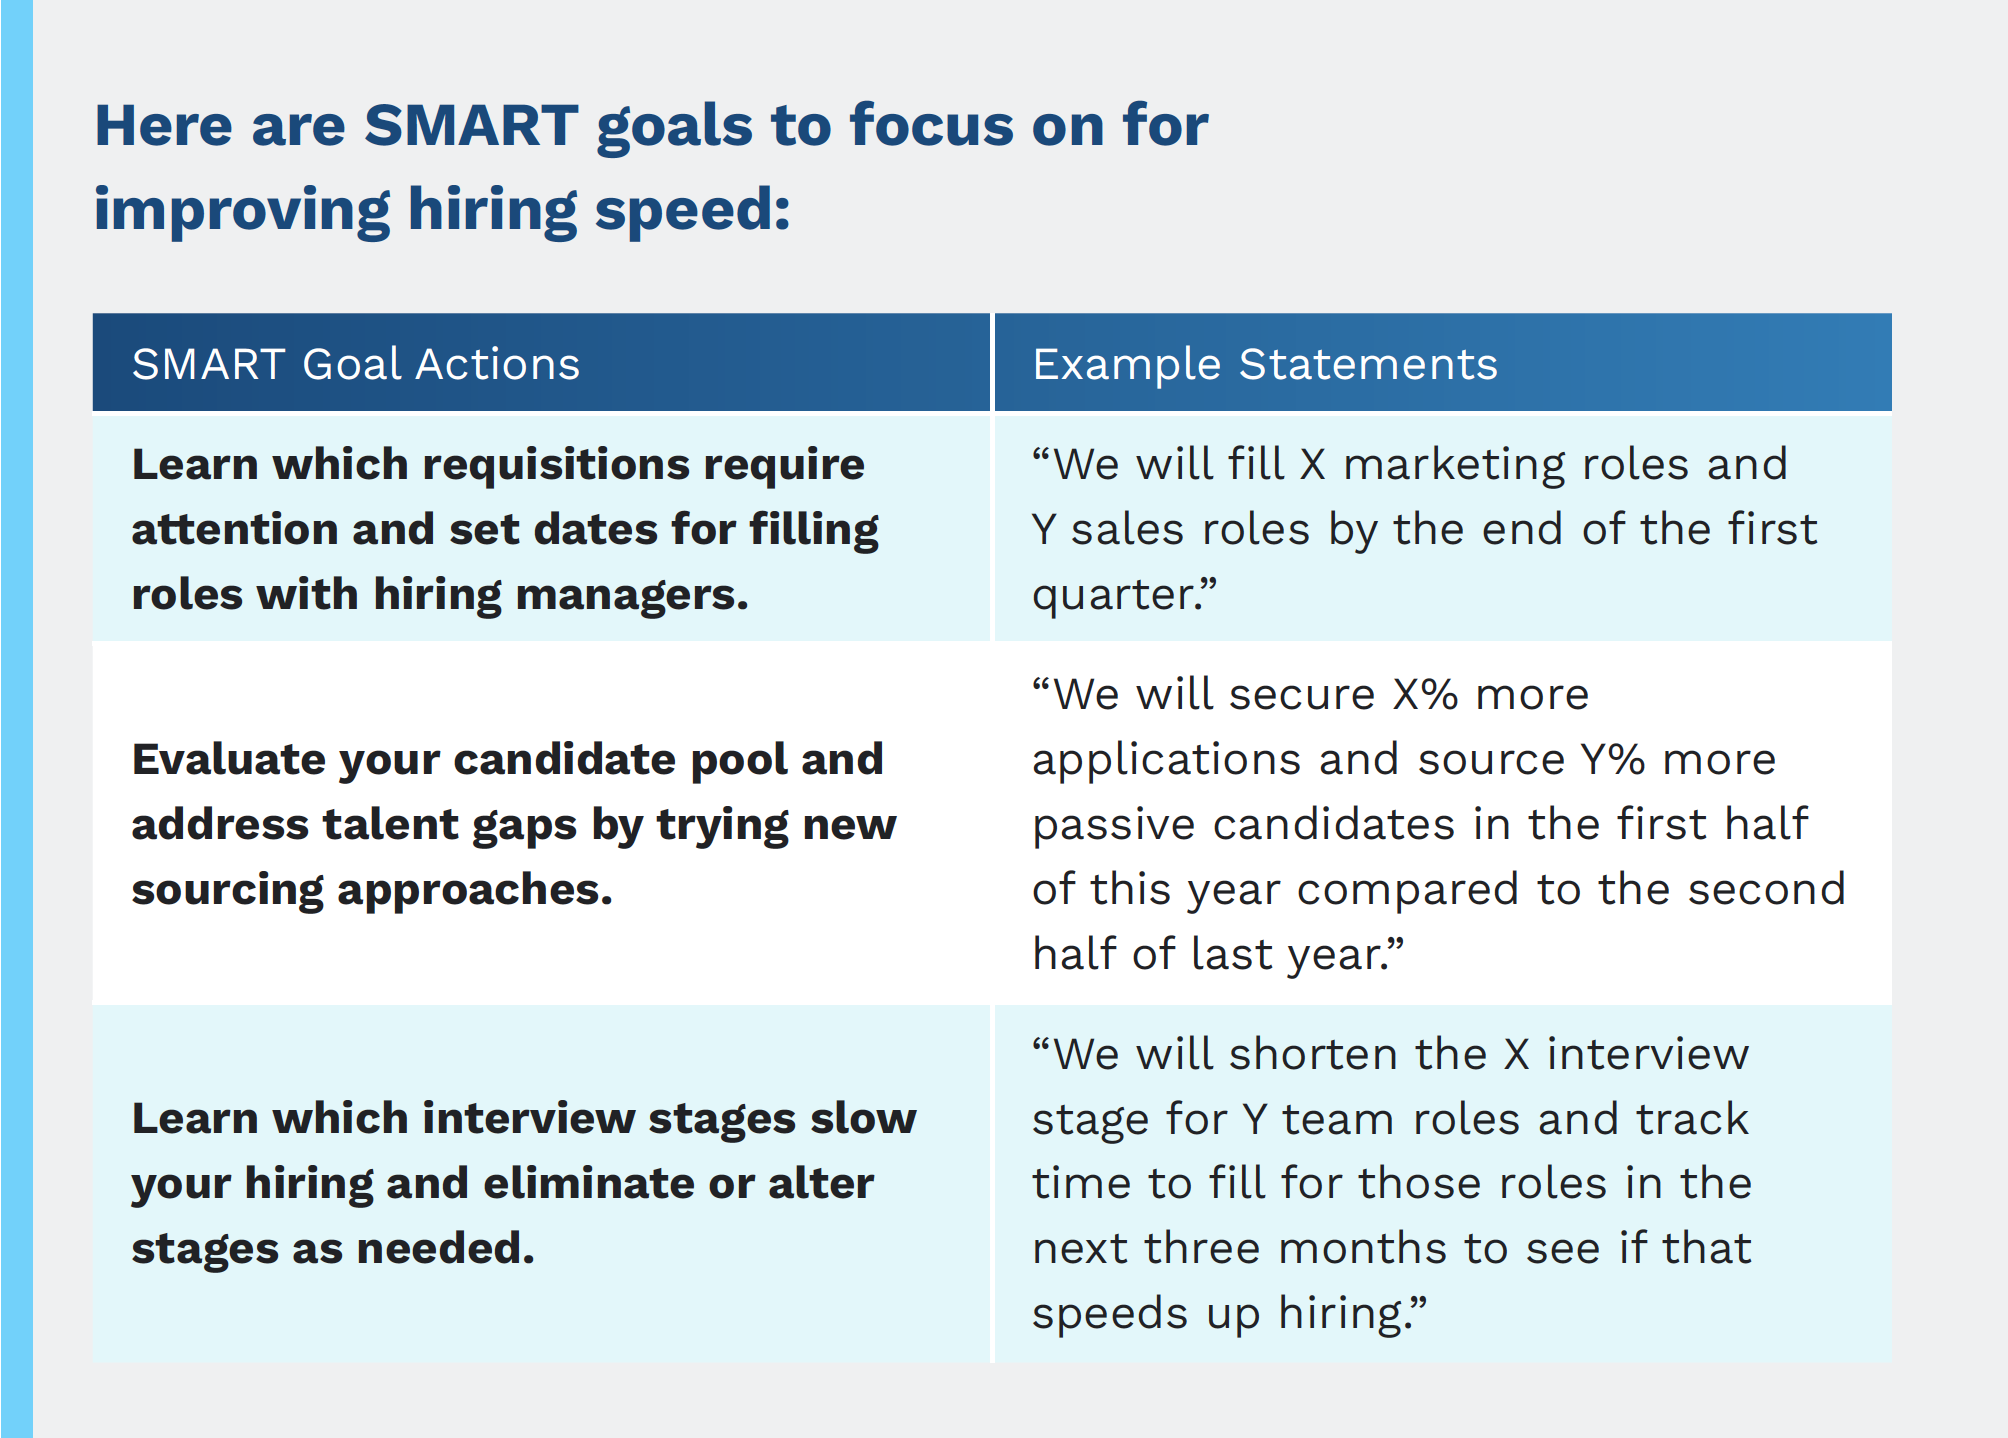 SMART goals to focus on for hiring speed 